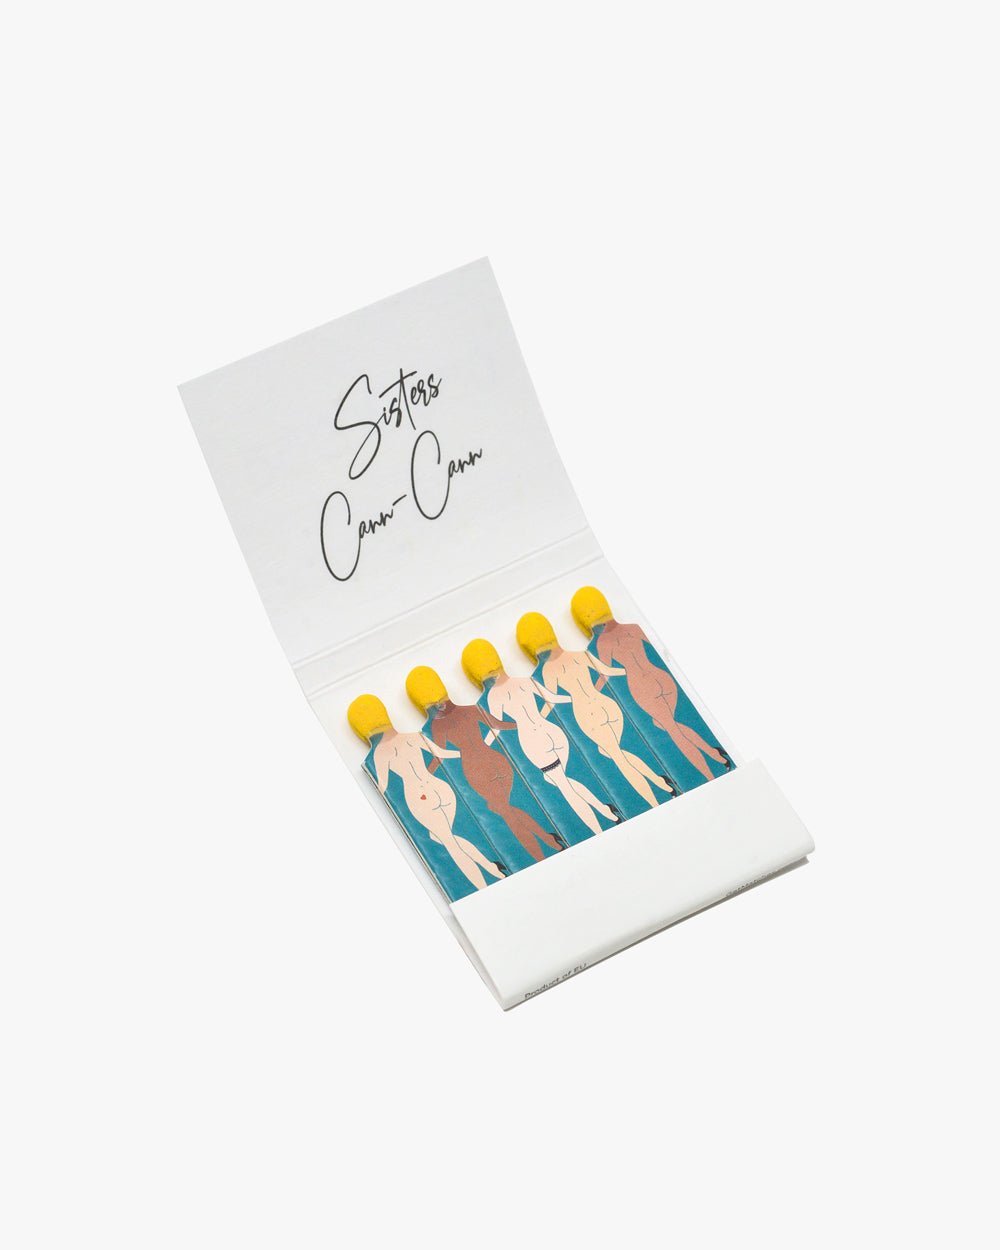 sisters cann-cann' matches (set of 3) - $12